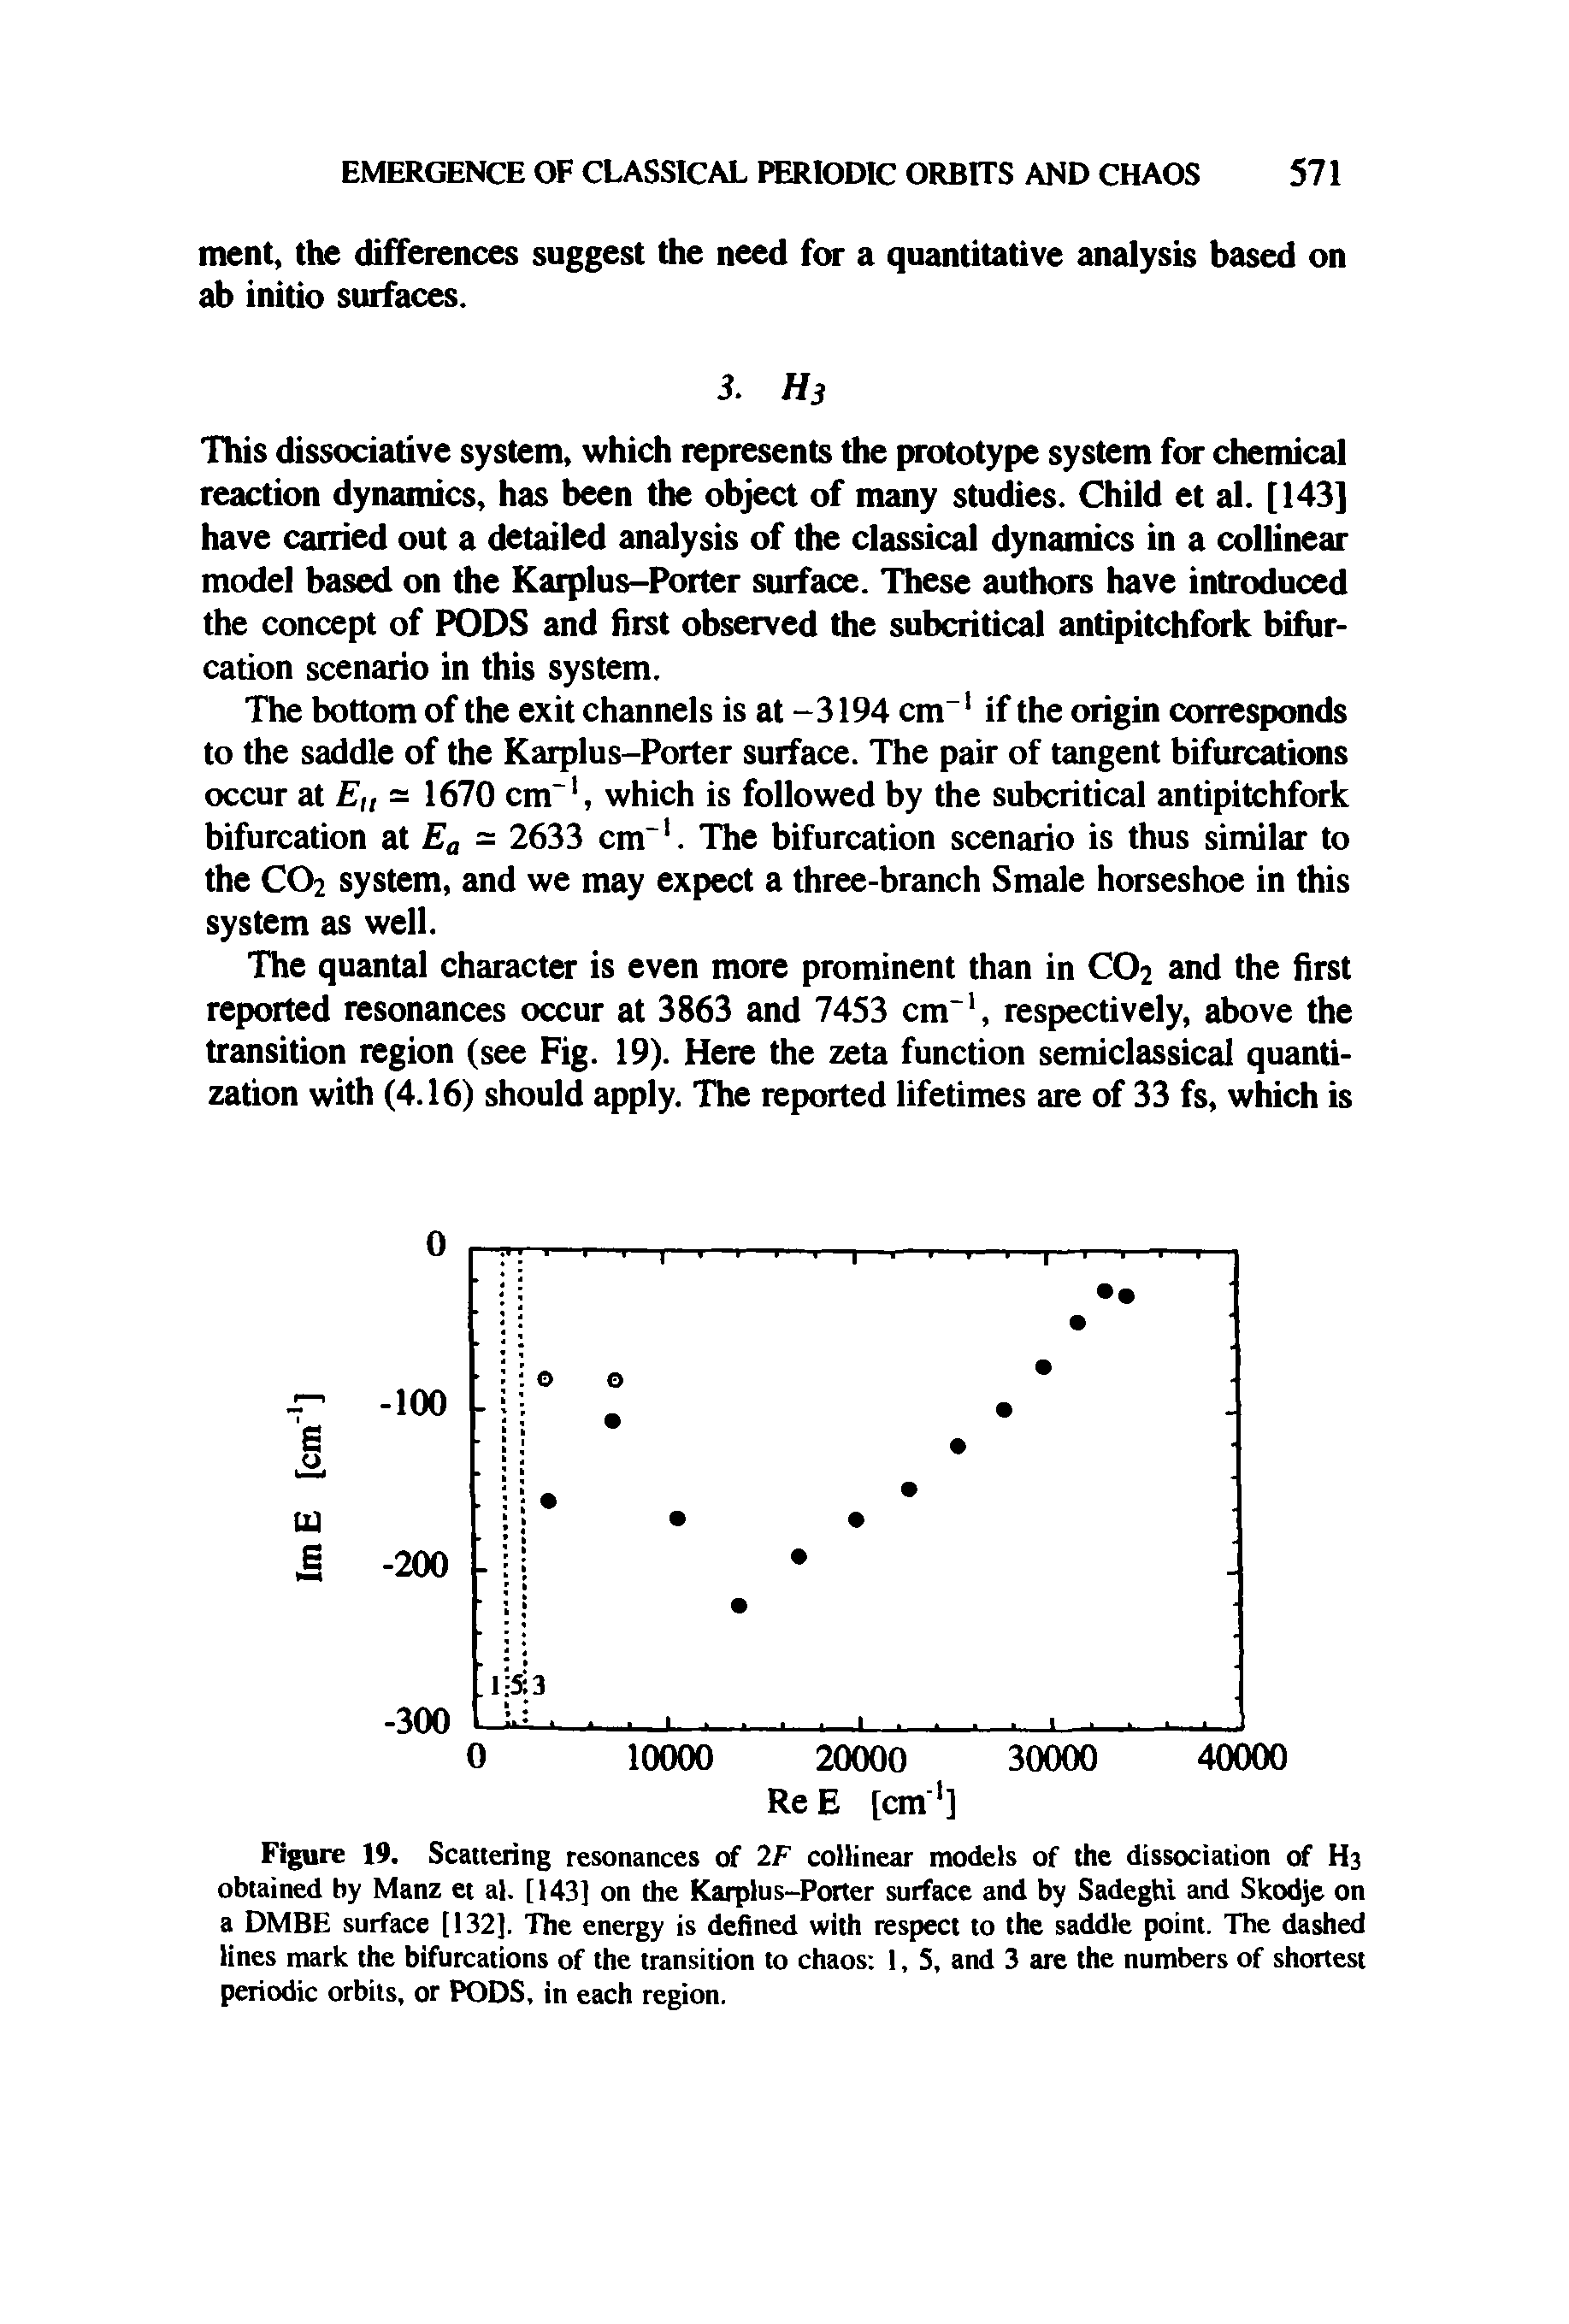 Figure 19. Scattering resonances of 2F collinear models of the dissociation of H3 obtained by Manz et al. [143] on the Karplus-Porter surface and by Sadeghi and Skodje on a DMBE surface [132], The energy is defined with respect to the saddle point. The dashed lines mark the bifurcations of the transition to chaos 1, 5, and 3 are the numbers of shortest periodic orbits, or PODS, in each region.